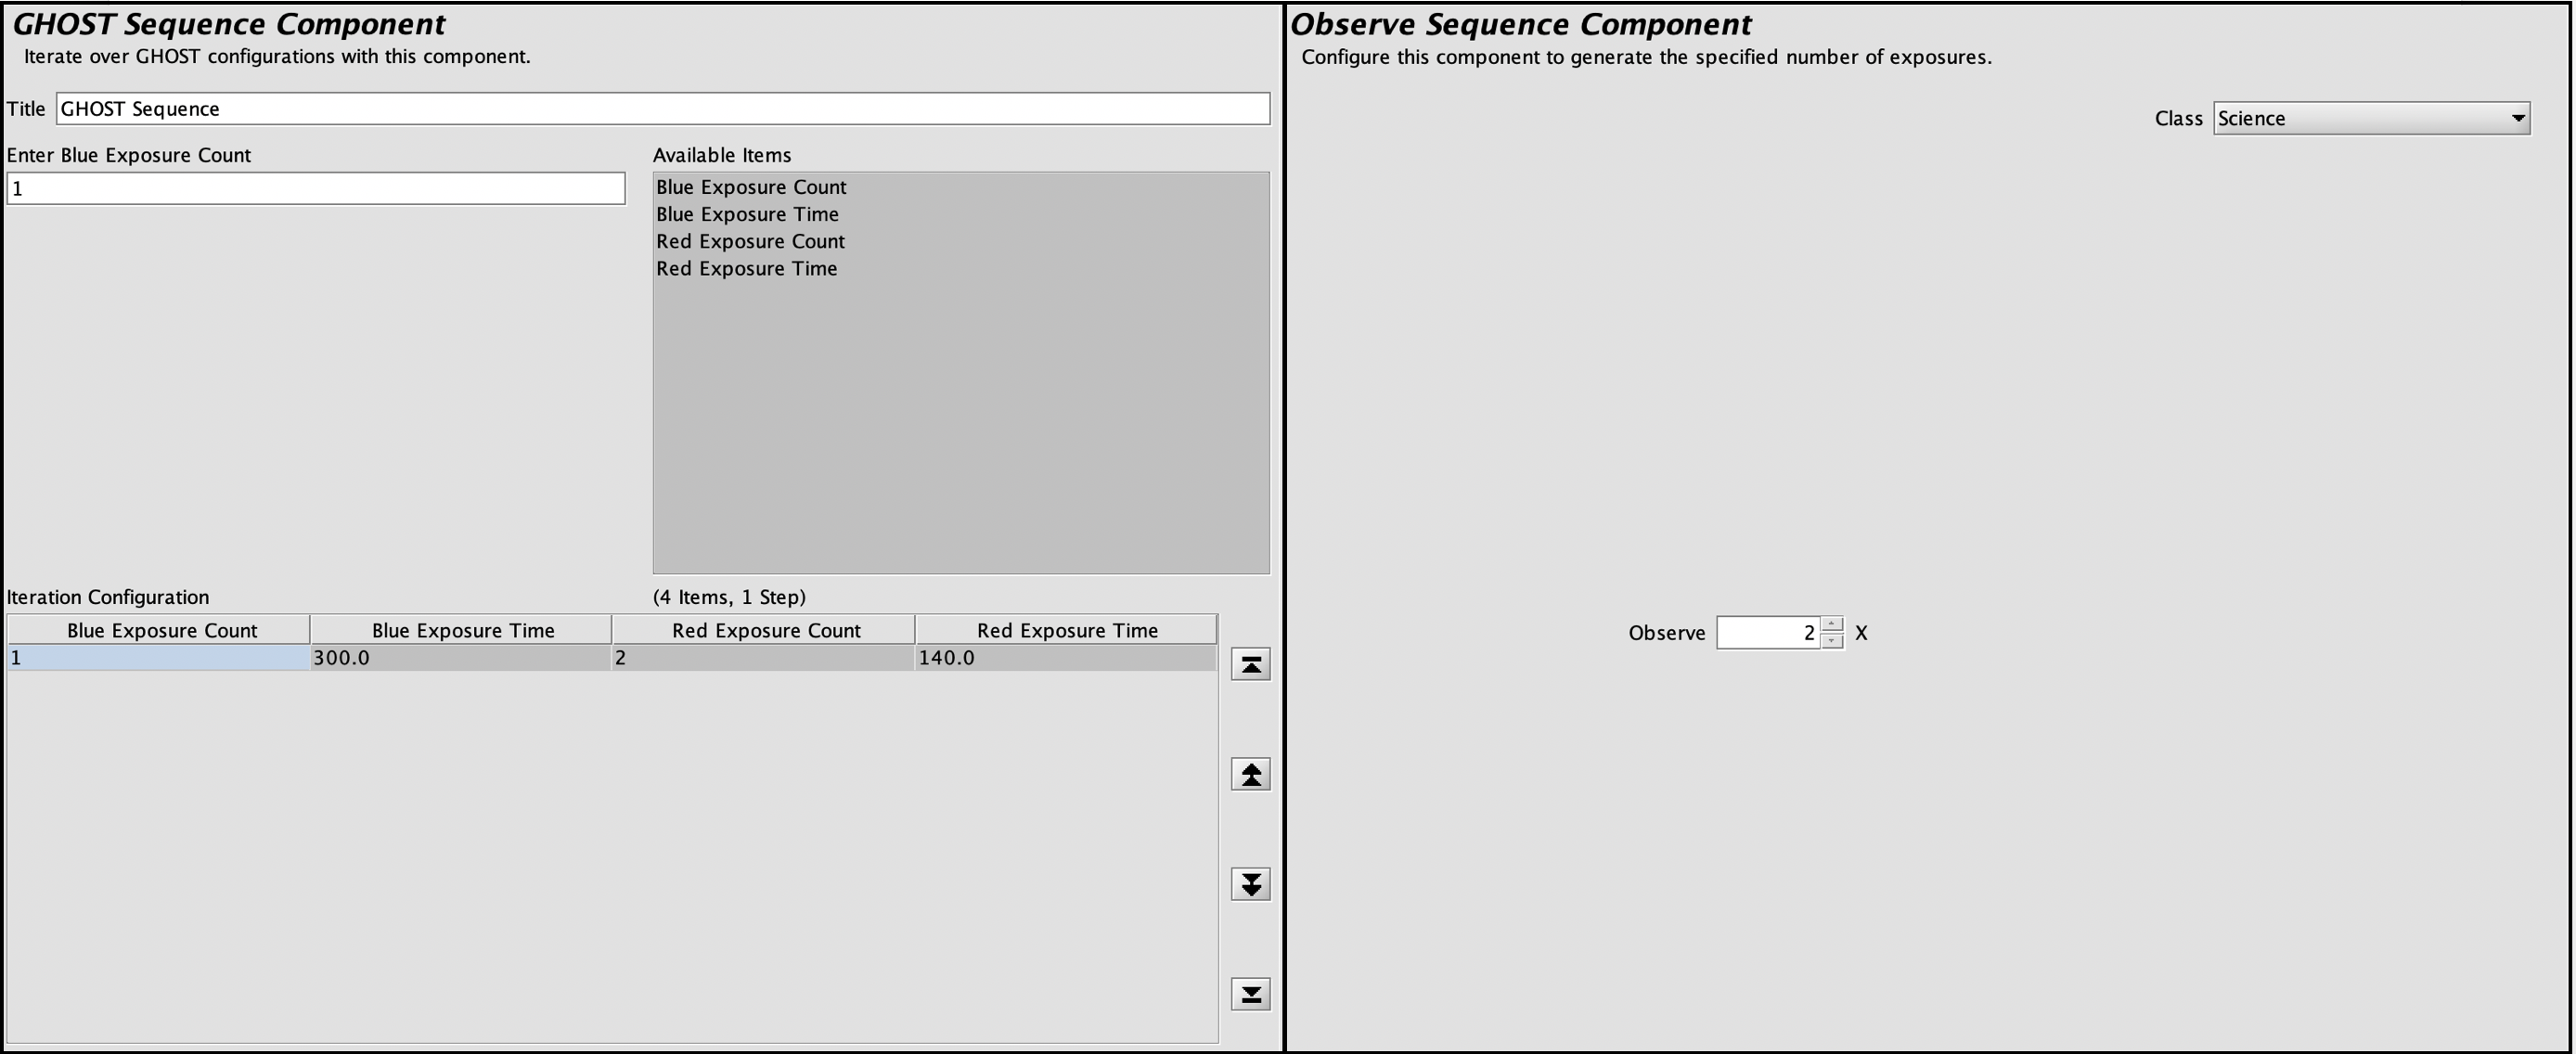 Screenshot showing example of the GHOST Sequence Component and Observe Sequence Component.